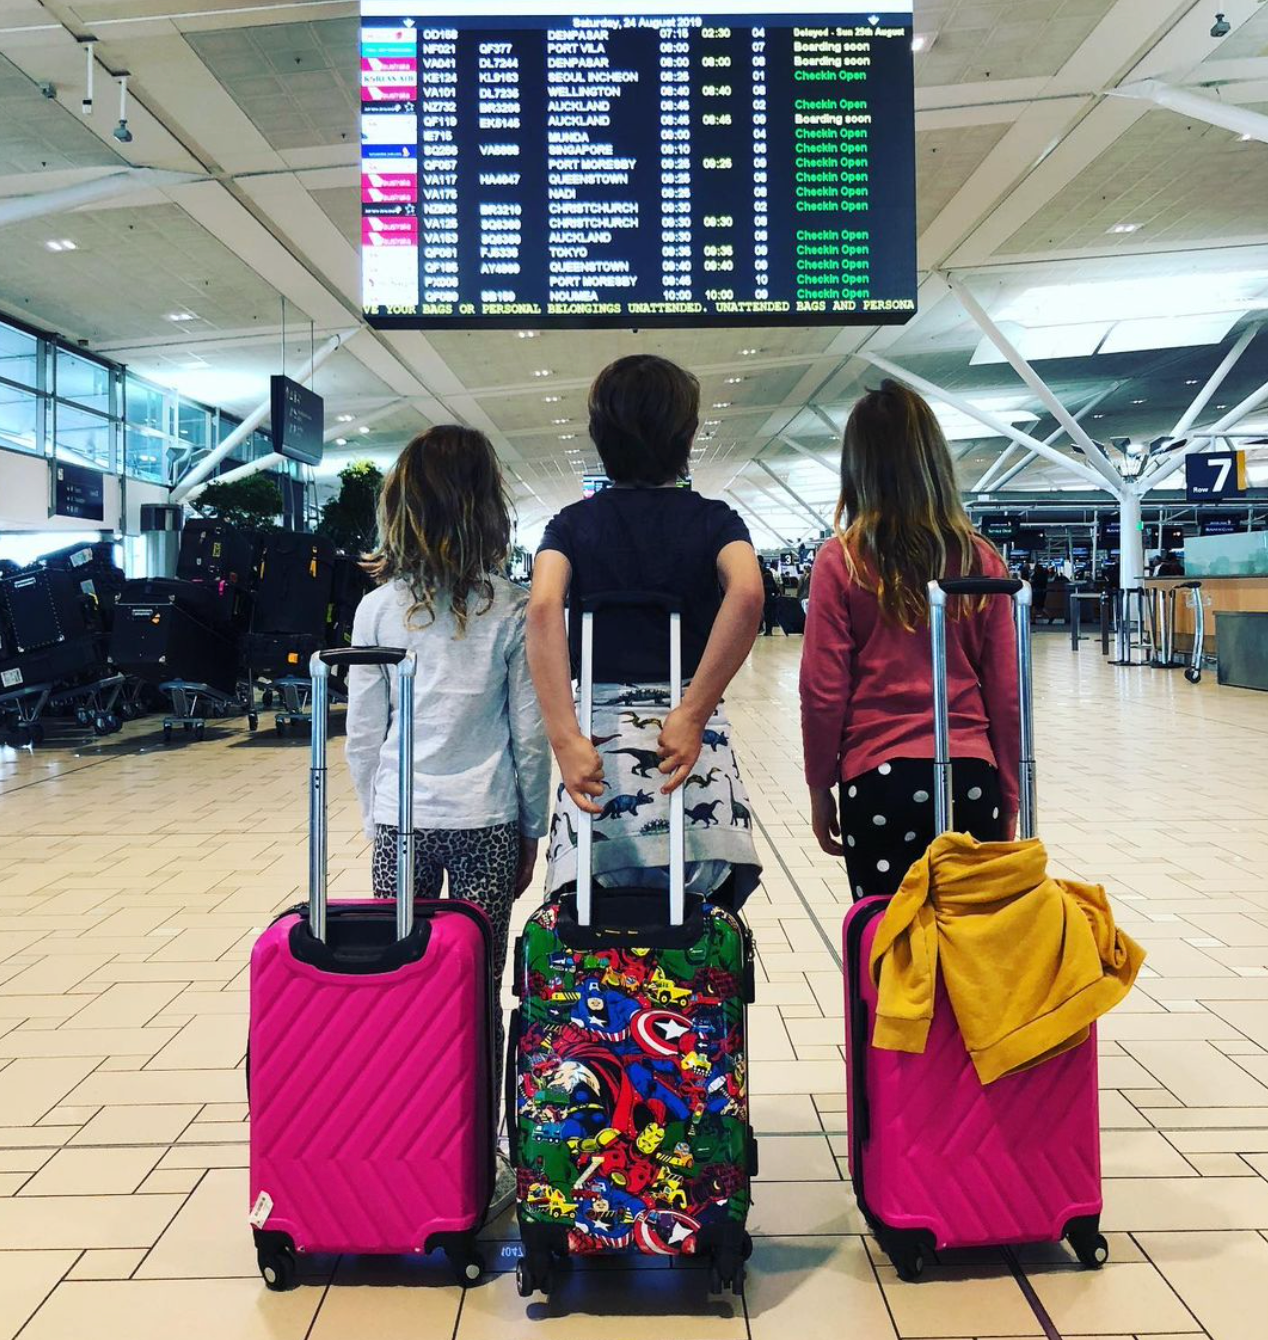 Family Travel Planning in a Post Covid World